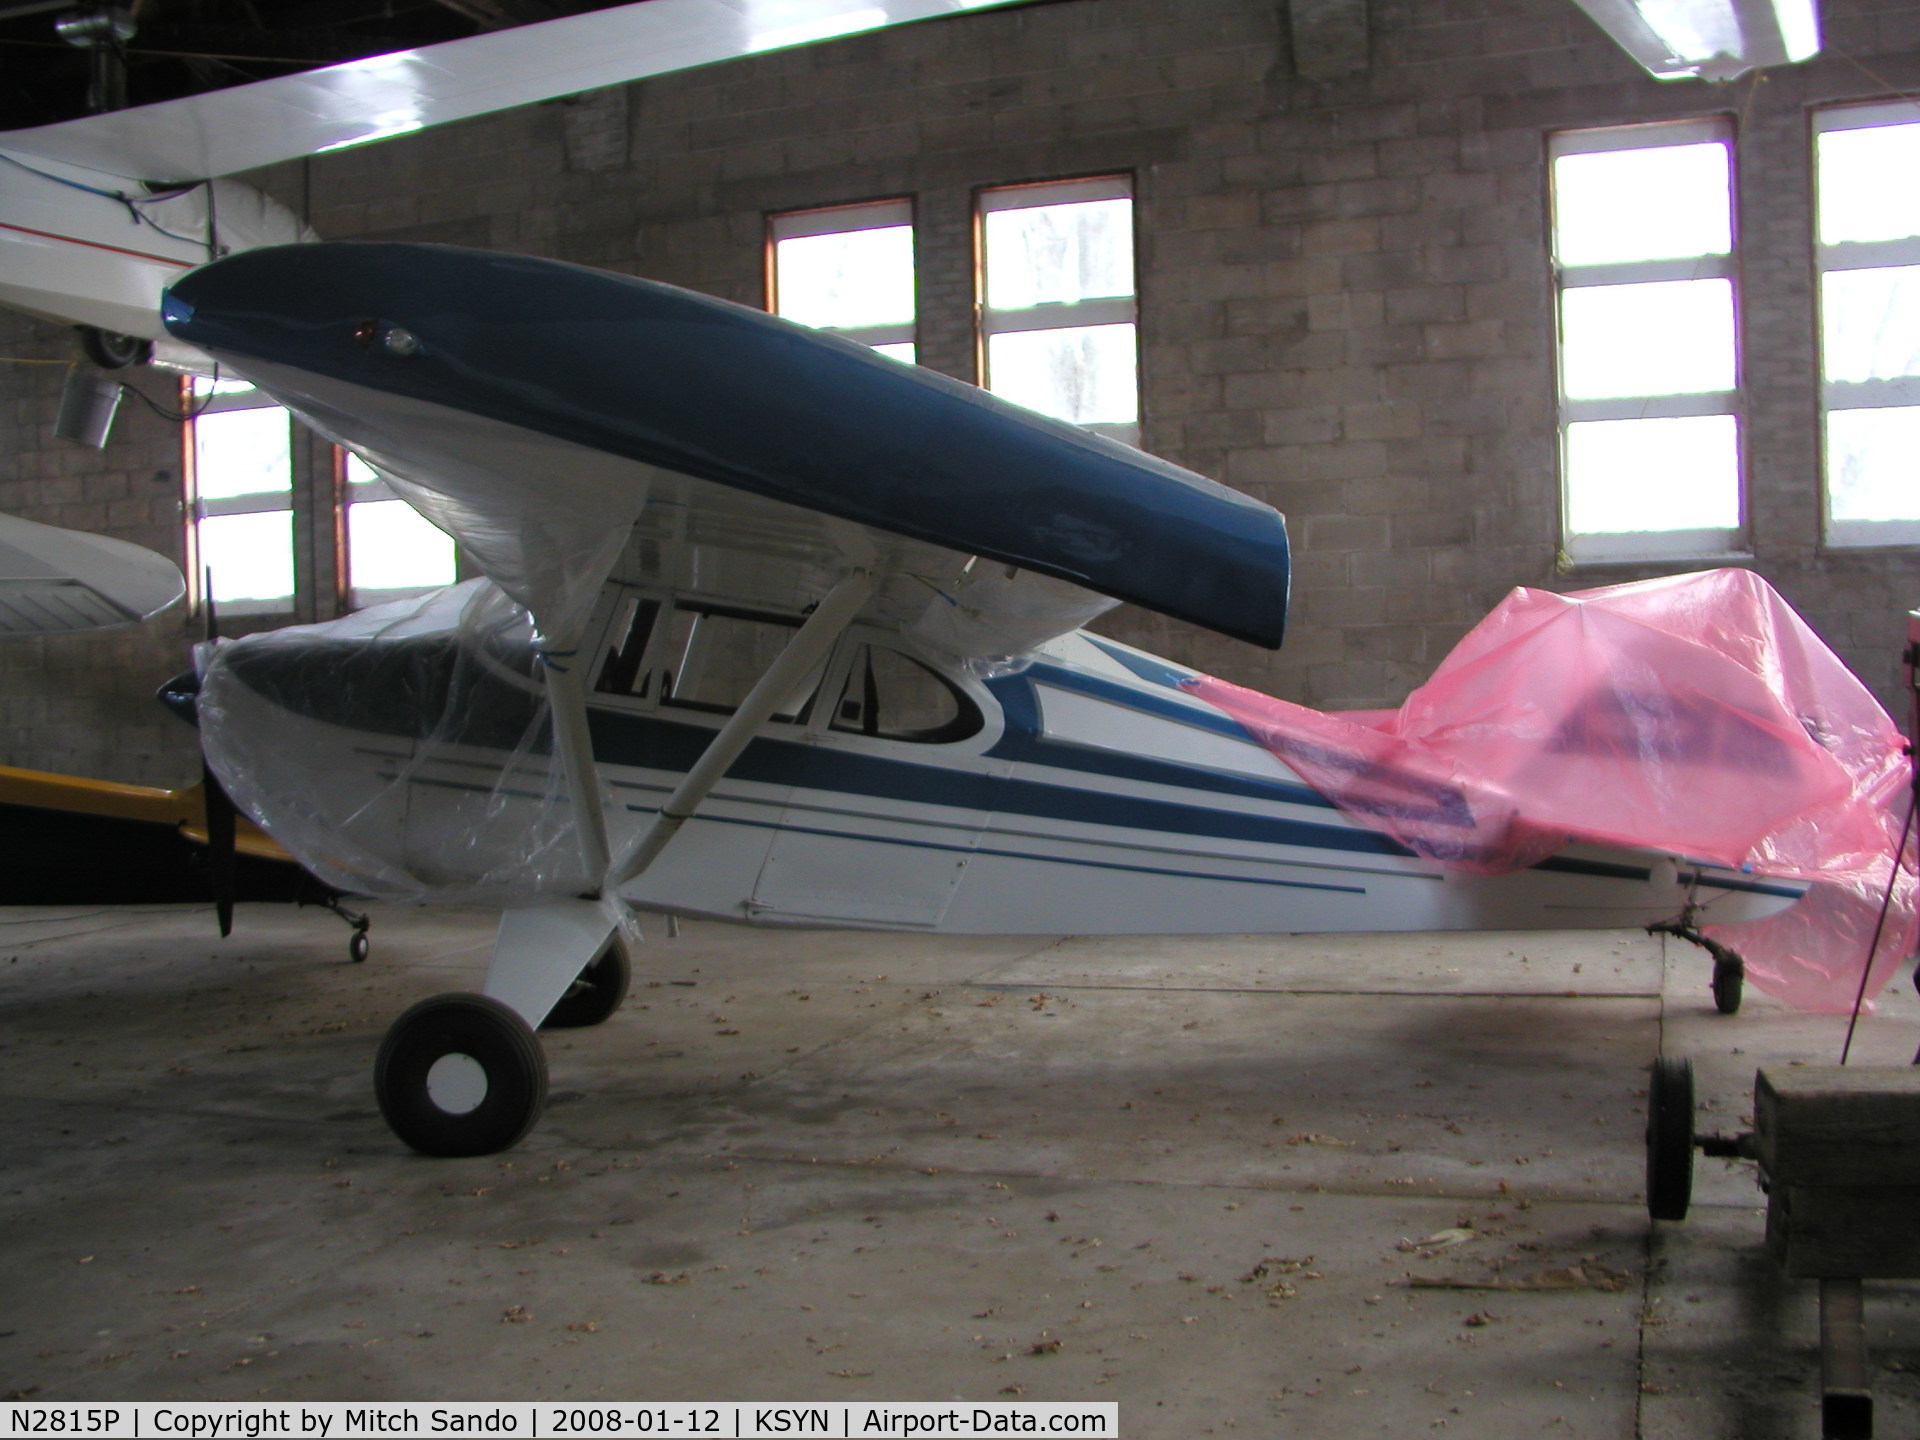 N2815P, 1955 Piper PA-22-150 C/N 22-3108, Parked inside the main hangar at Stanton.